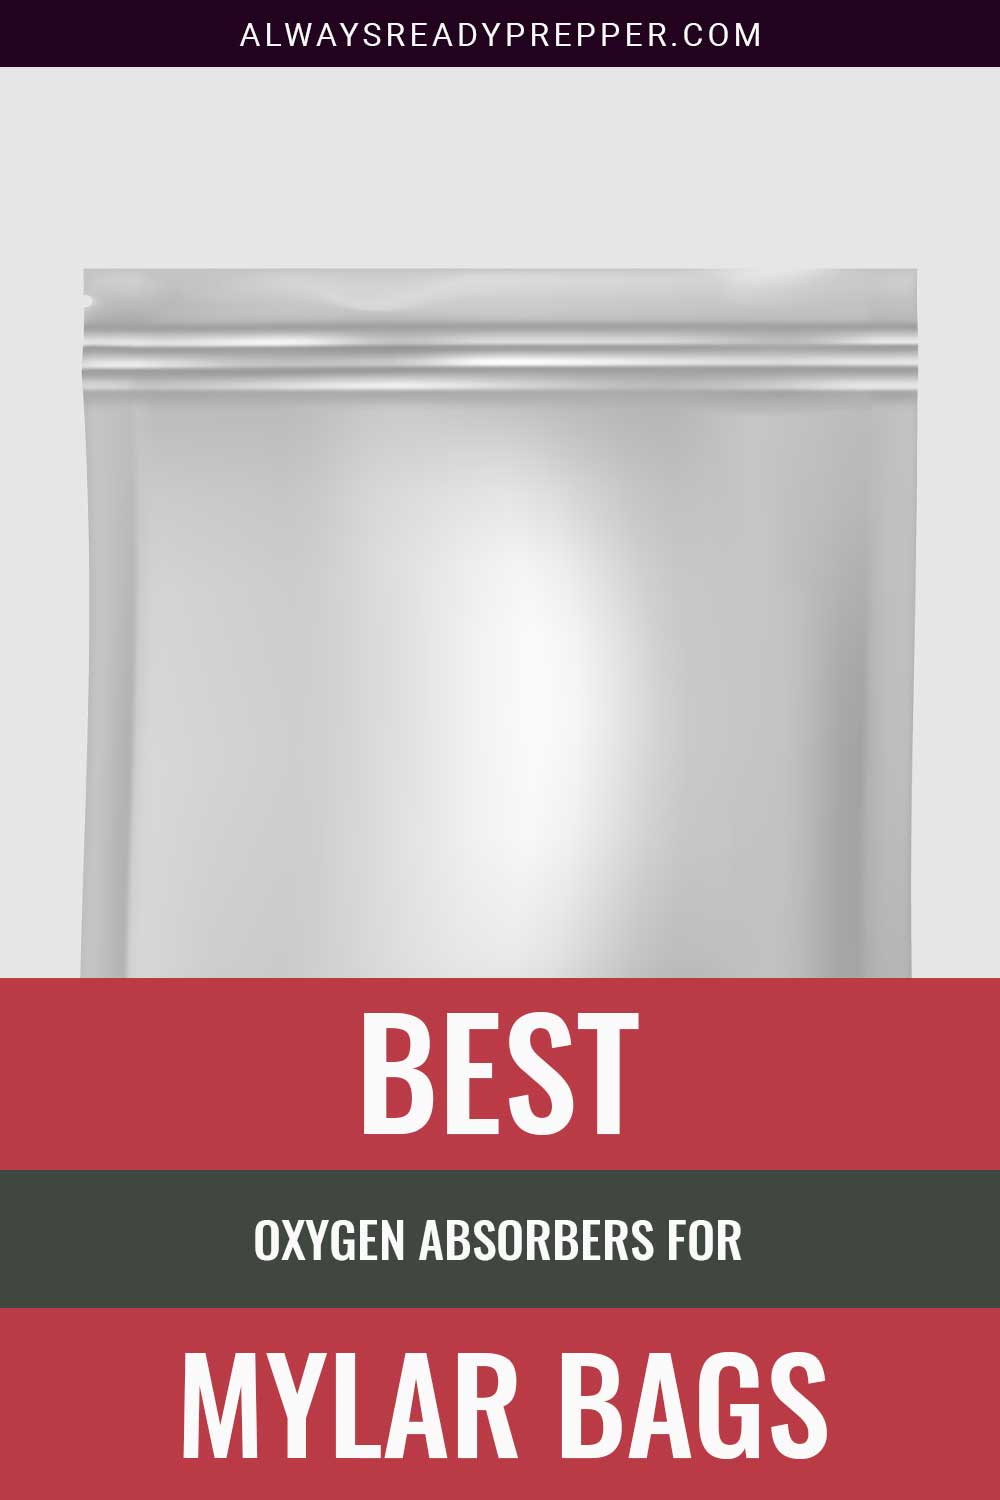 A mylar bag in front of a white background - Best Oxygen Absorbers for these.